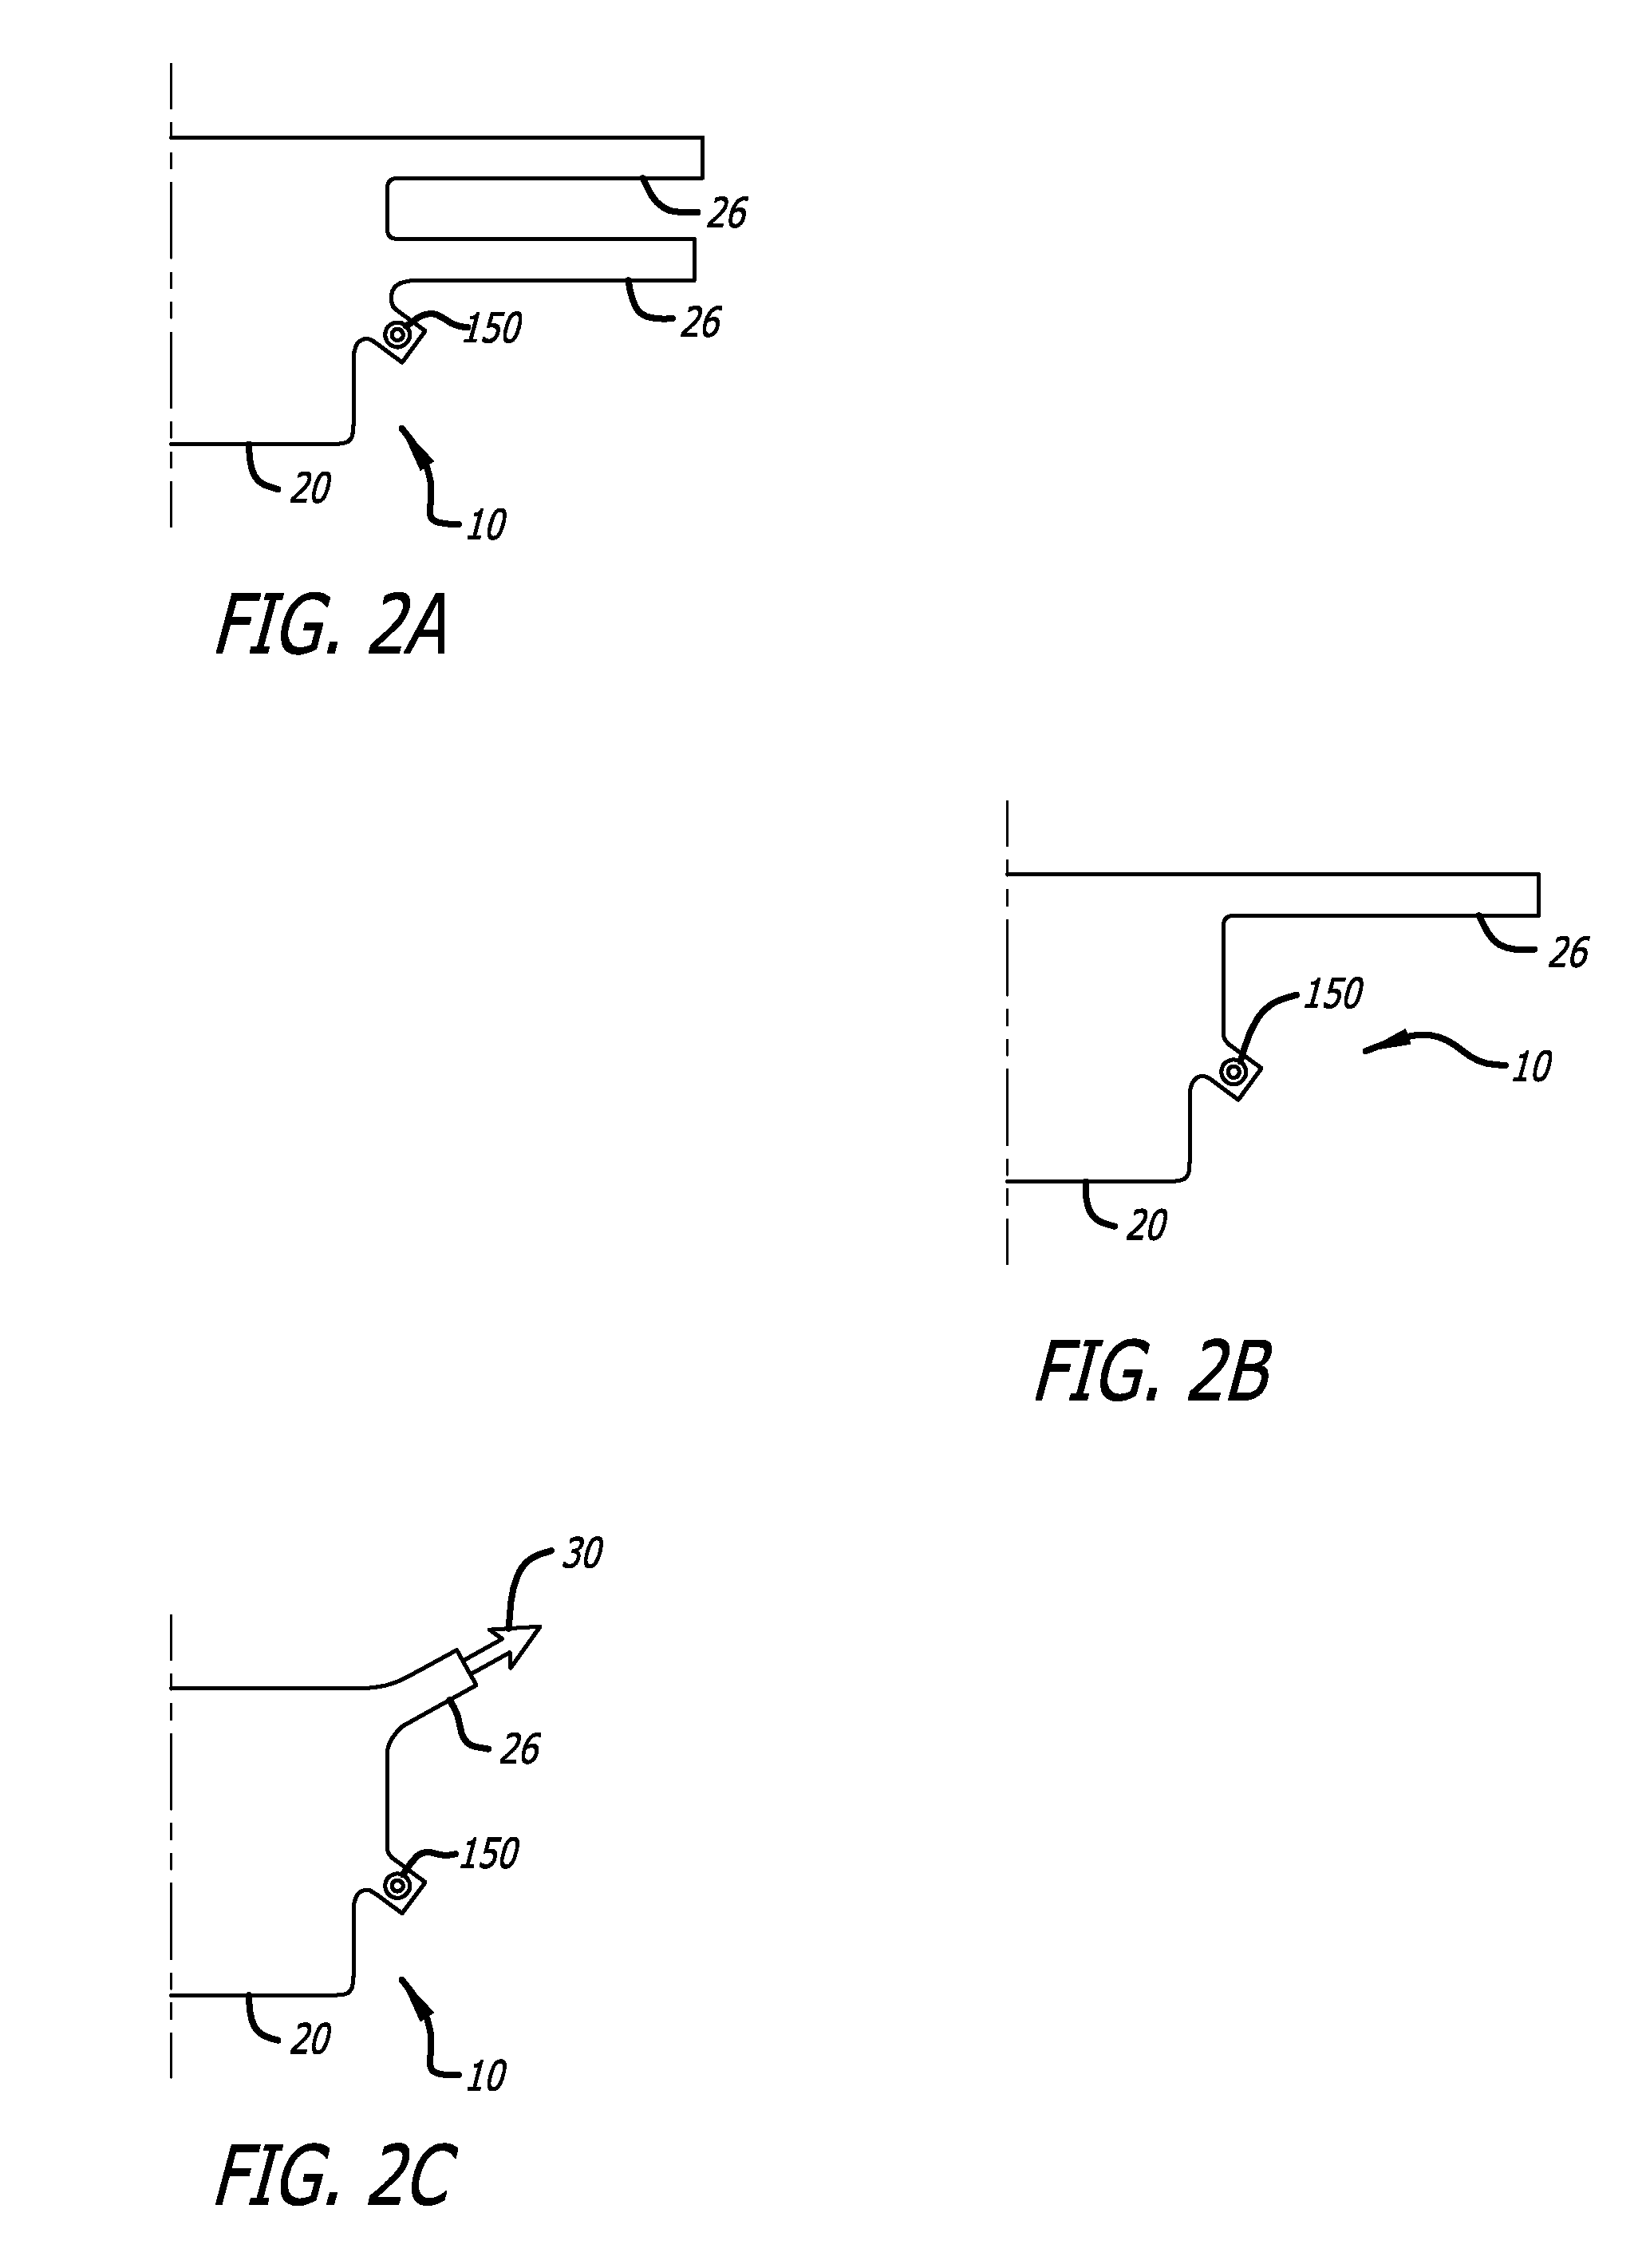 Implants And Procedures For Supporting Anatomical Structures